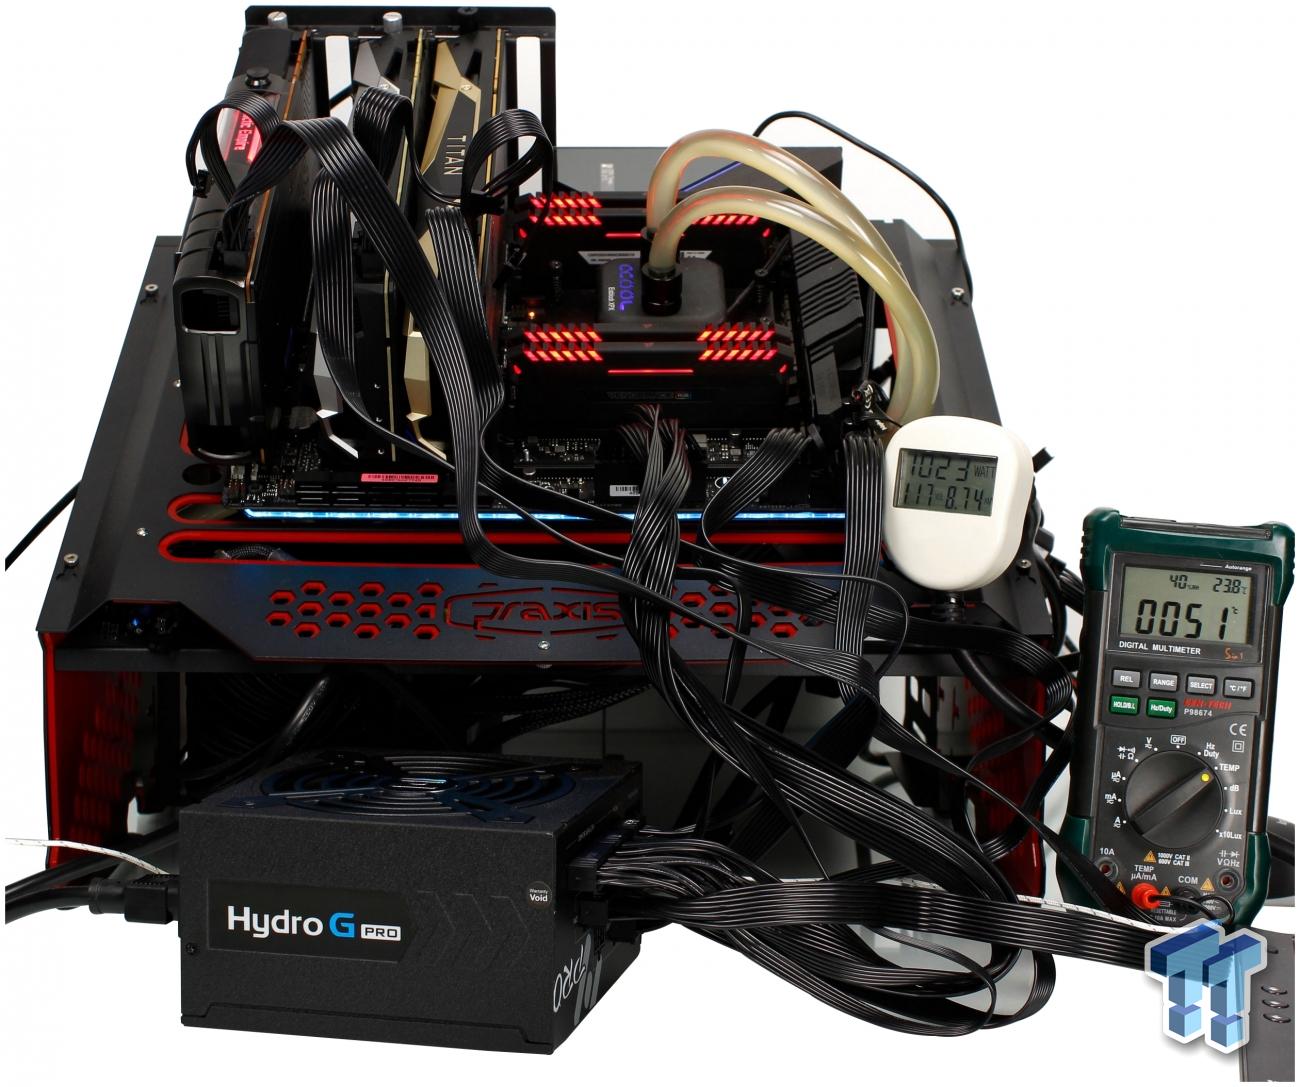 FSP Hydro G PRO 1000W Power Supply Review